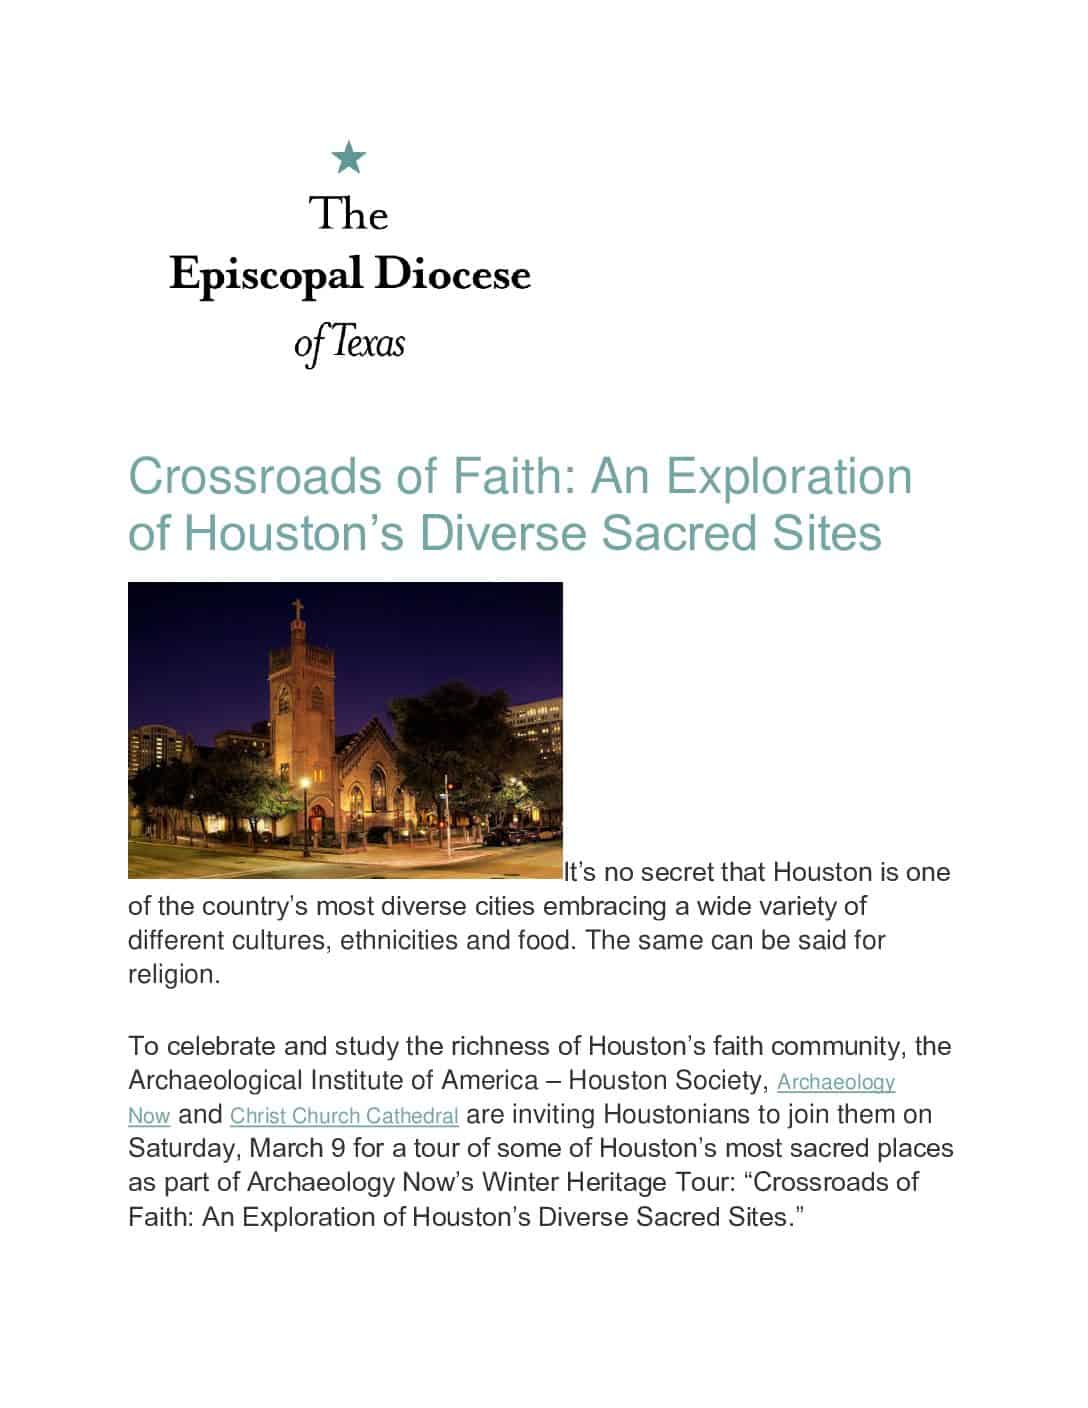 Archaeology Now – Episcopal Diocese